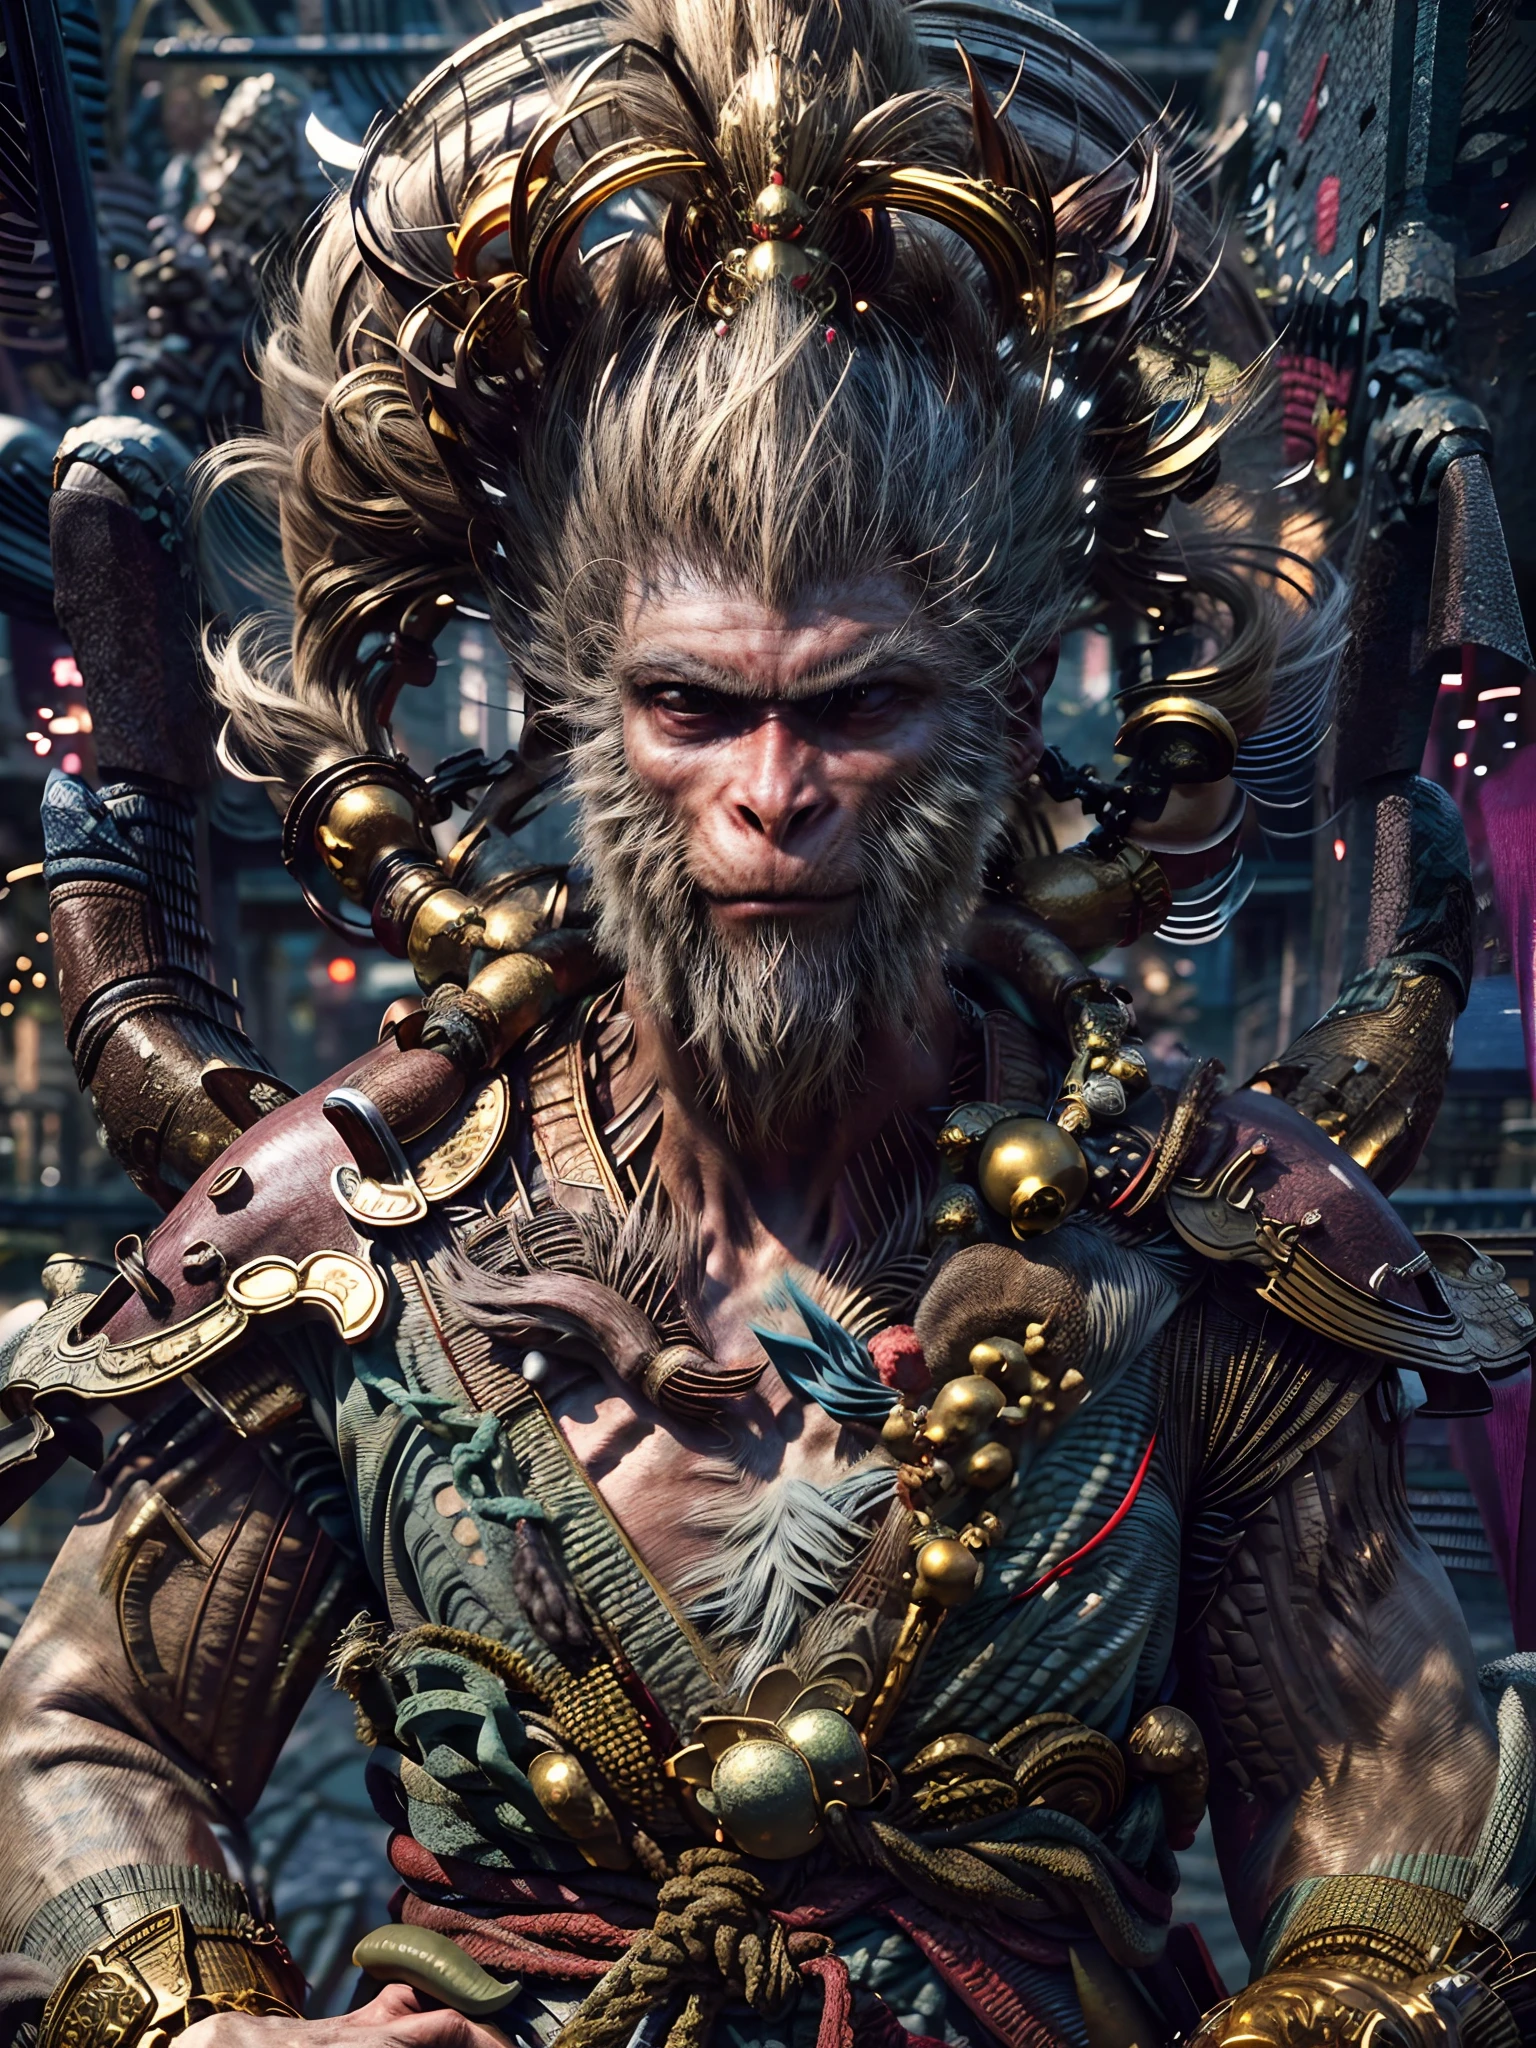 (Masterpiece, A sacred portrayal of the Monkey King:1.4), wukong，(Charming illustration of monkey god in his iconic appearance:1.2), (Meticulous details capture his palatial presence:1.2), (Created to commemorate mythical figures in Chinese folklore:1.2), (The Monkey King wears a golden crown, Symbolizes his pious status:1.3), (His hairy muscles exude strength and majesty:1.3), (Dressed in bright red and gold robes, Pay tribute to his legendary journey:1.1), (Holding a long staff, Firmly rooted in the ground, The embodiment of his power:1.3), (Perched atop a magnificent Chinese temple, Prove his divinity:1.1), (Intricate temple architecture，Vivid red and gold tones:1.1), (The vibrant blue sky contrasts:1.1), (The wind rustled his fur and robe, Add dynamic motion to your scene:1.1), (His eyes radiate wisdom and confidence:1.1), (The gold headdress sparkles in the sun, A symbol of his celestial origins:1.1), (Capture the otherworldly aura and depiction of existence of the gods:1.1), (The color scheme enhances the cultural richness of the scene:1.1), (A depiction that pays homage to the legendary status and significance of God:1.1), (One invites viewers to marvel at the image of the majestic avatar of the Monkey King:1.1)), Cinematic, Hyper-detailed, insanely details, beautifully color-graded, illusory engine, degrees of , Hyper-Resolution, megapixel, Cinematic lightning, Anti-aliasing, FKAA, TXAA, RTX, SSAO, post-proces, postproduction, Tone-mapping, .CGI, vfx, SFX, insanely detailed and intricate, hyper-maximalist, Ultra photo realsisim, volumetr, Photorealistic, The ultra-realistice, Ultra-detailed, Intricate details, Super detailed, Full color, Volumetric lightning, hdr, Realistic, illusory engine, 16k, Sharp focus, rendering by octane